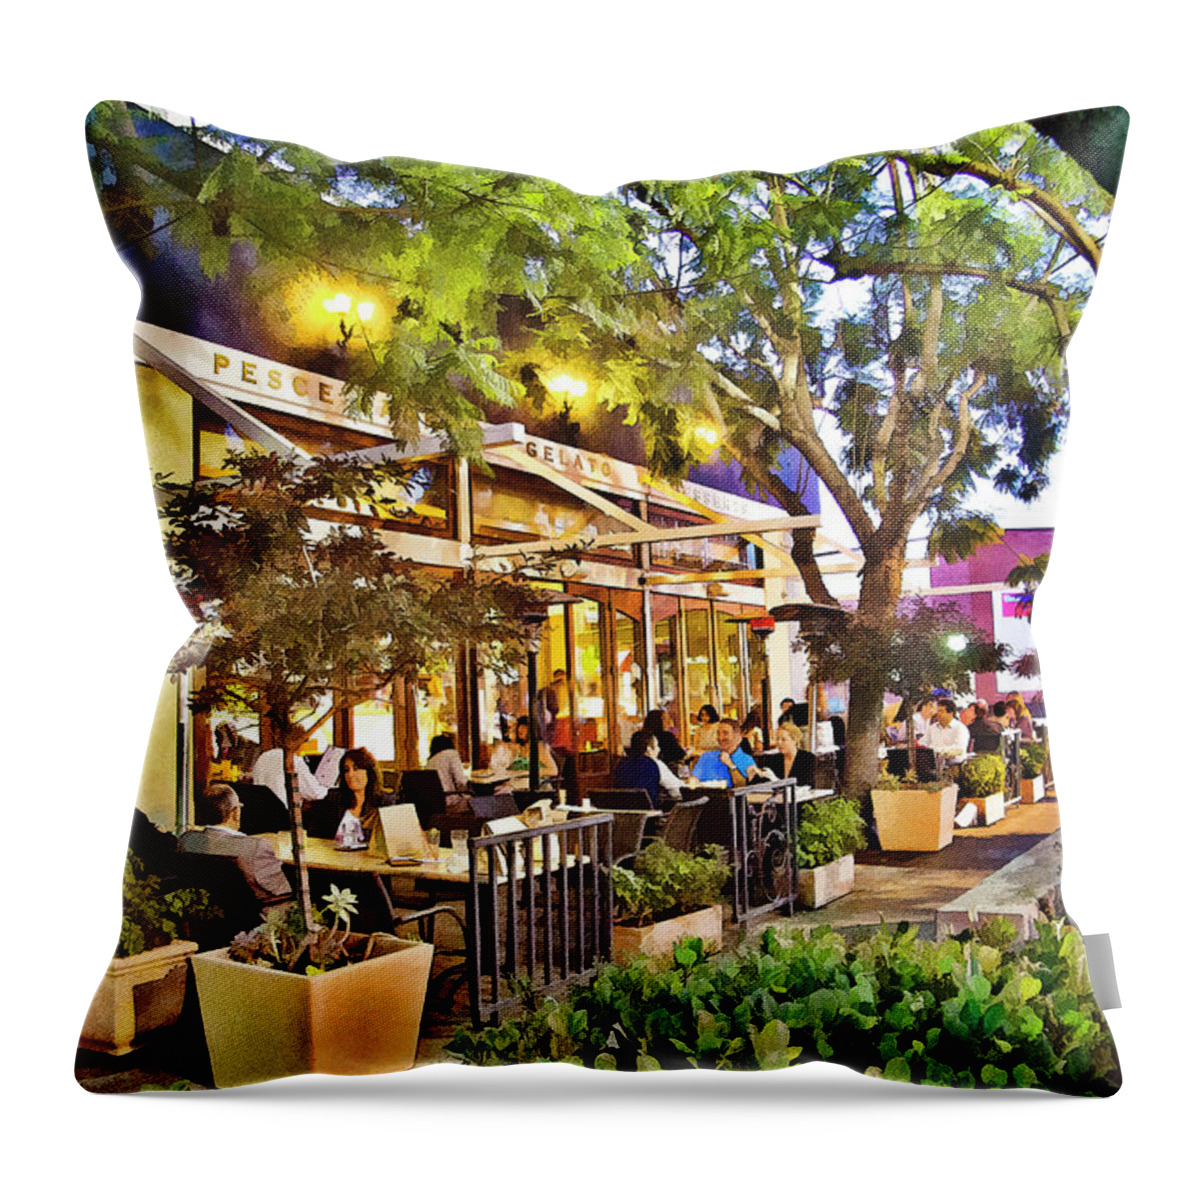 Al Fresco Dining Throw Pillow featuring the photograph Al Fresco Dining by Chuck Staley